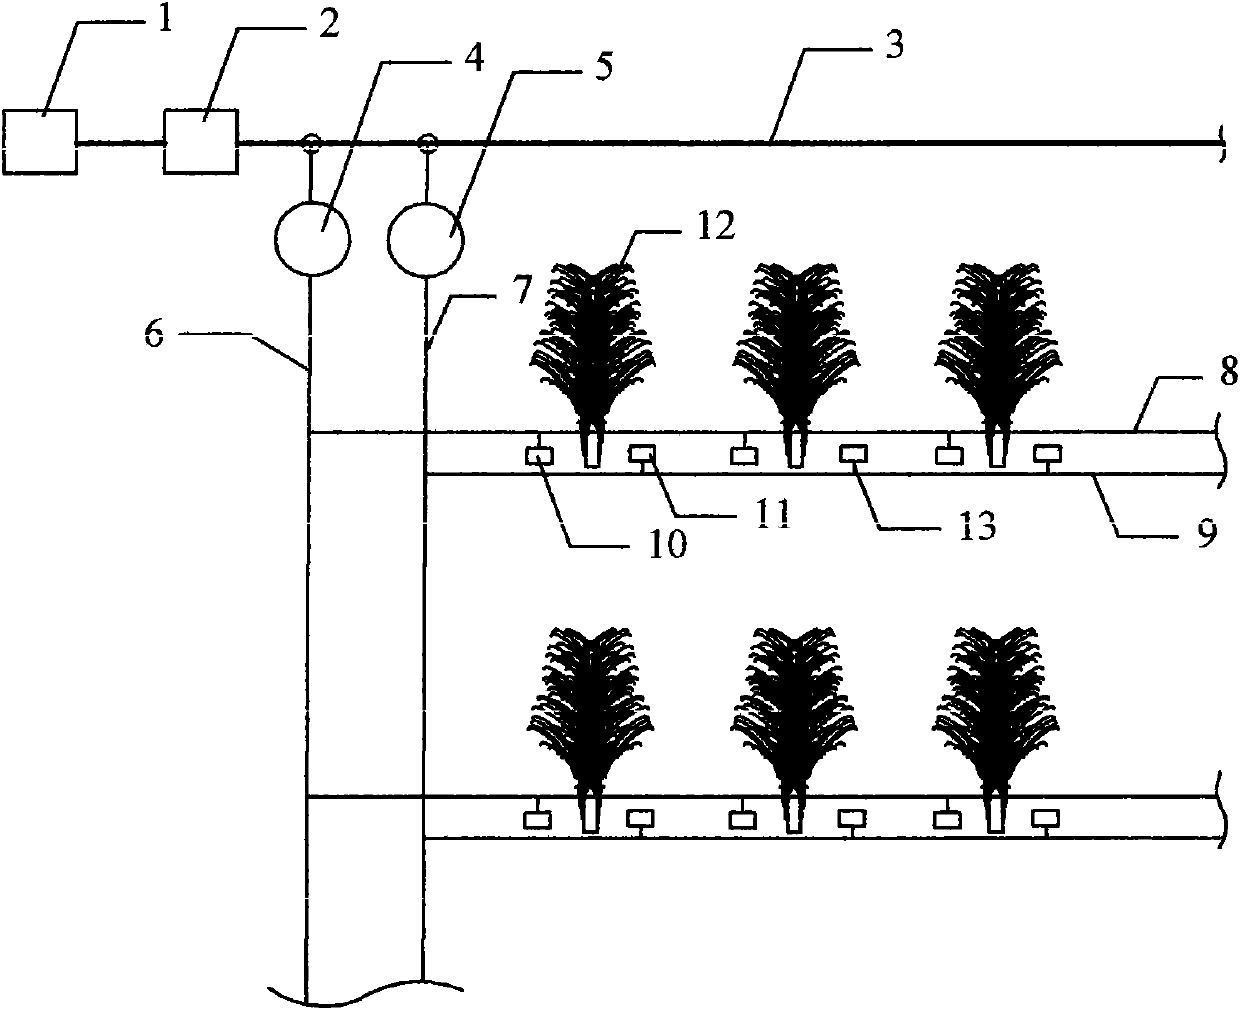 Underground areal alternate infiltrating irrigation system for large-land fruit trees and infiltrating irrigation method thereof